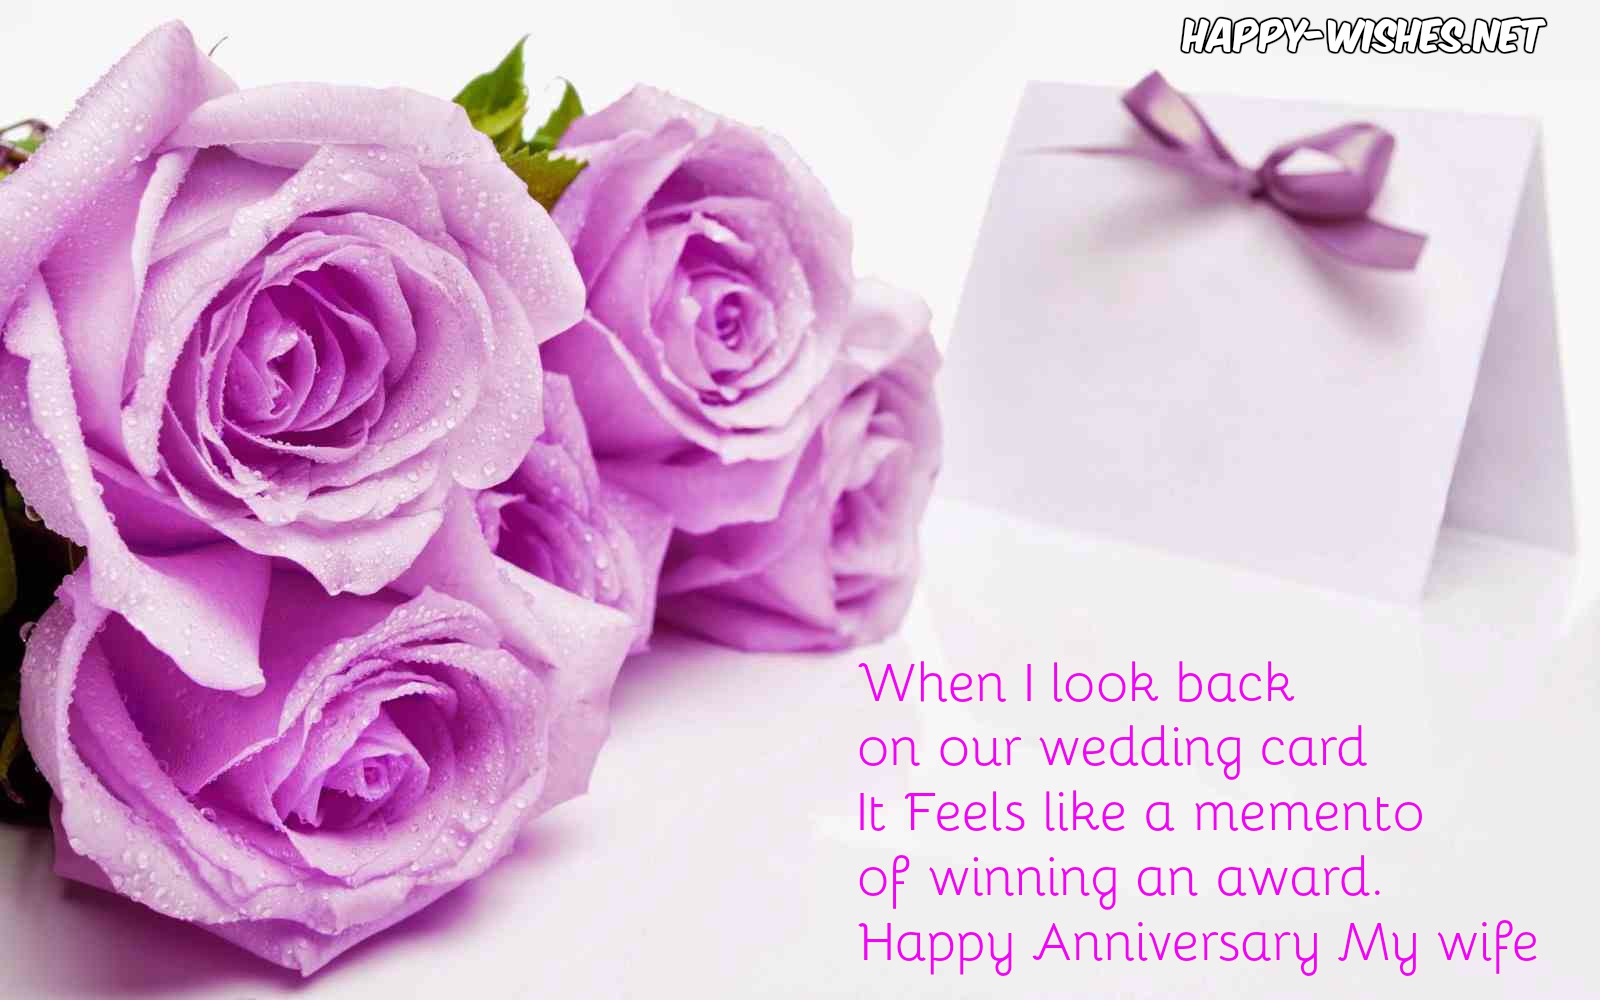 Best Happy Anniversary Messages and quotes